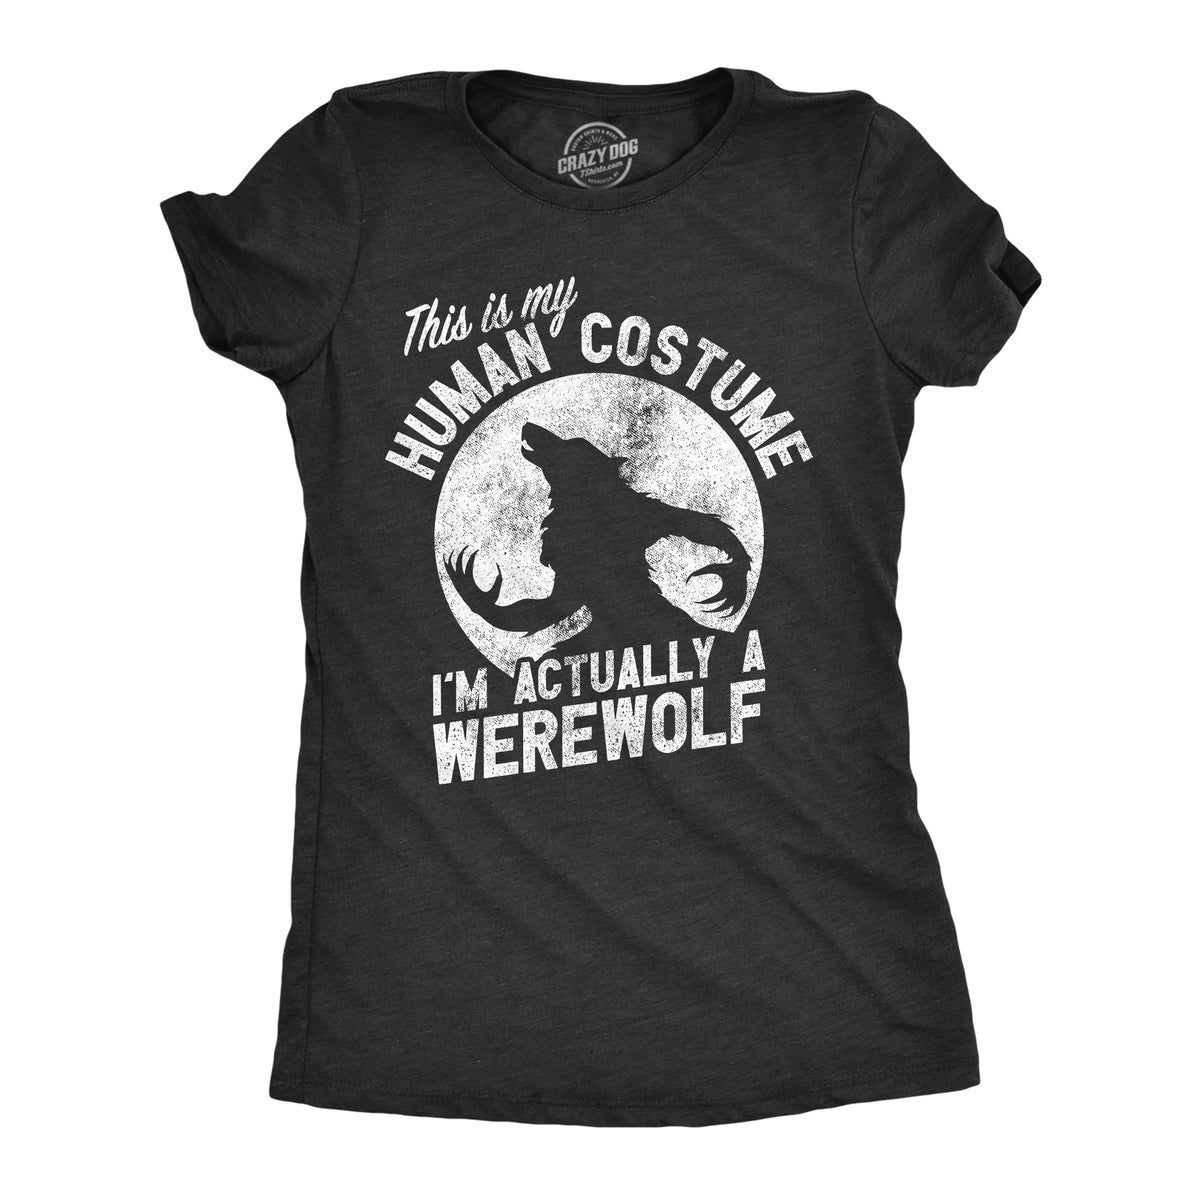 Funny Heather Black - HUMAN This Is My Human Costume Im Actually A Werewolf Womens T Shirt Nerdy Halloween sarcastic Tee